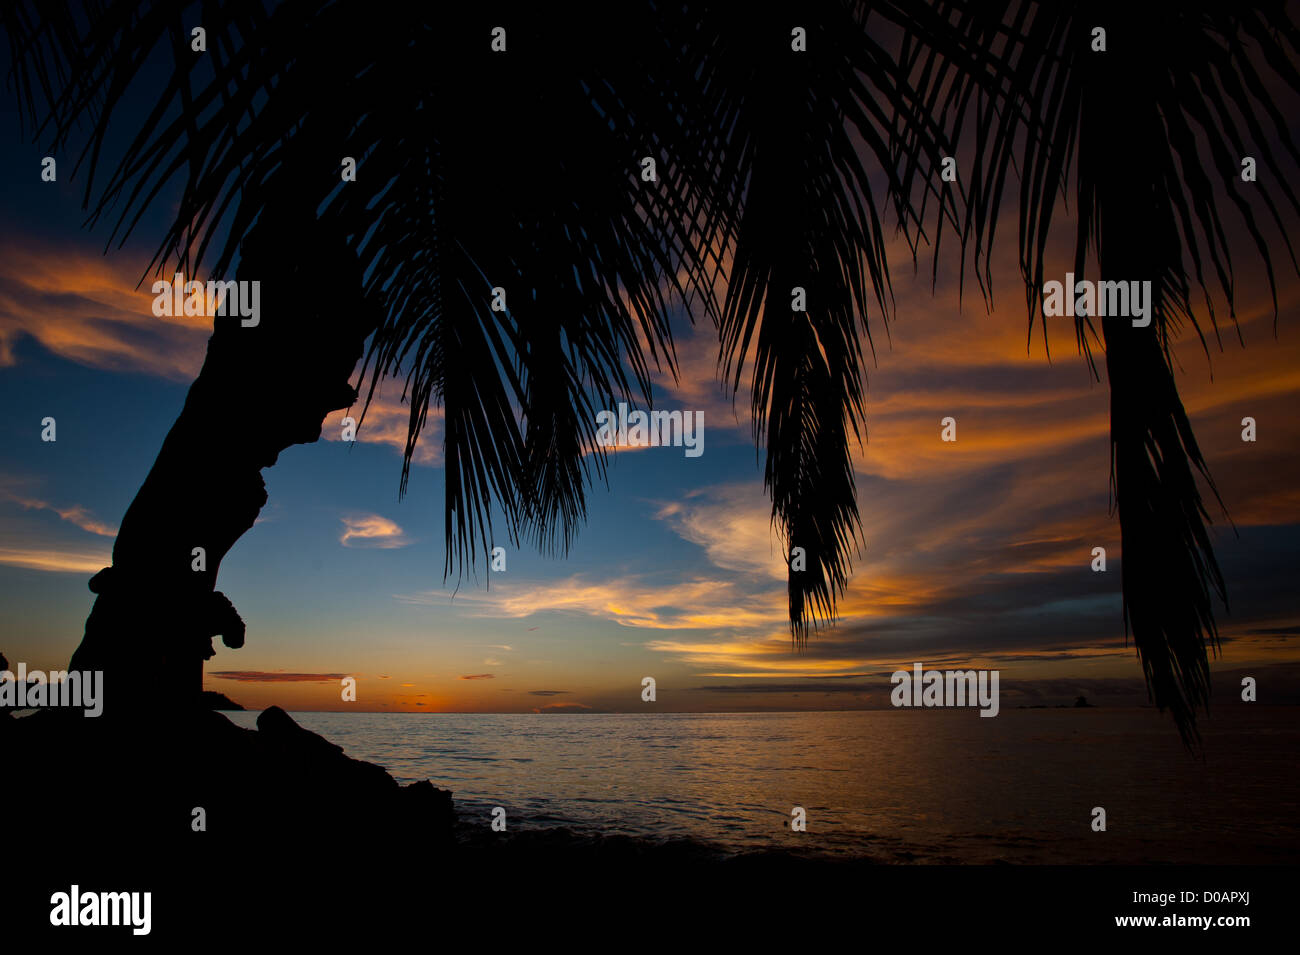 A sunset in West Sumatra Indonesia taken from the beach where palm trees and a huge root  were standing. Stock Photo